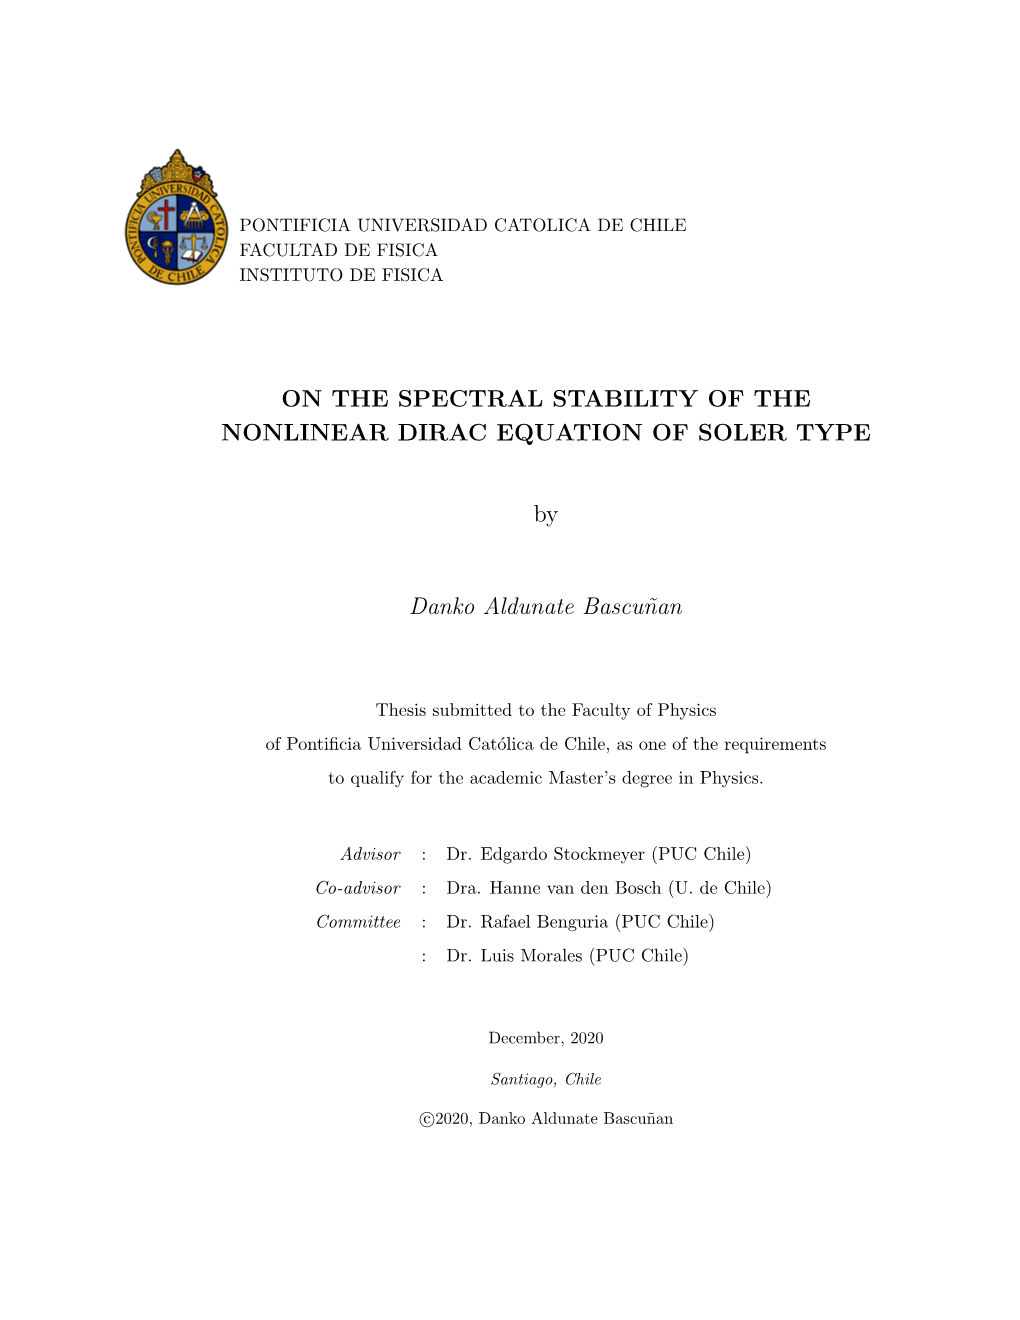 On the Spectral Stability of the Nonlinear Dirac Equation of Soler Type